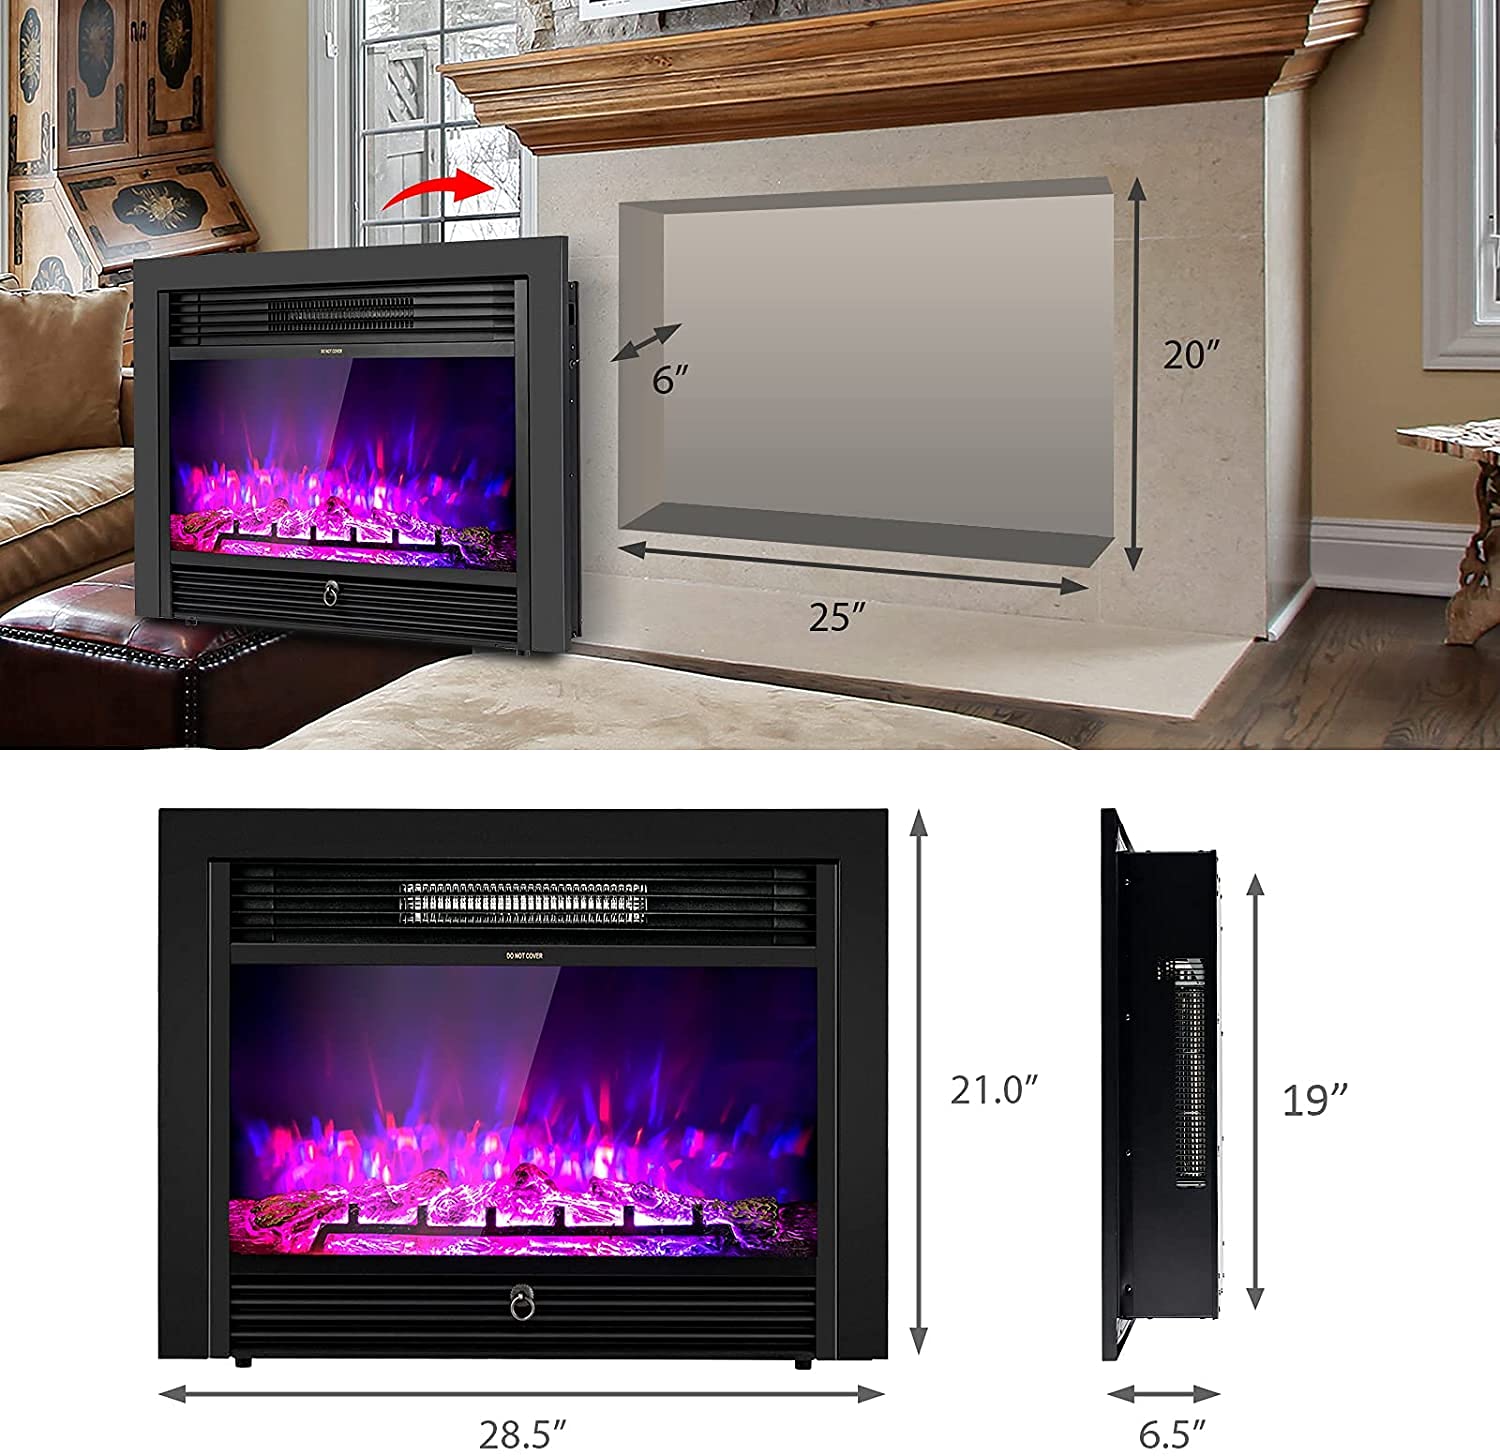 Topment 28.5" Recessed Electric Fireplace, Freestanding Fireplace Insert with Touch Screen Control Panel, Remote Control, Over-Heating Protection, 750-1500W Recessed in-Wall Heater with Timer